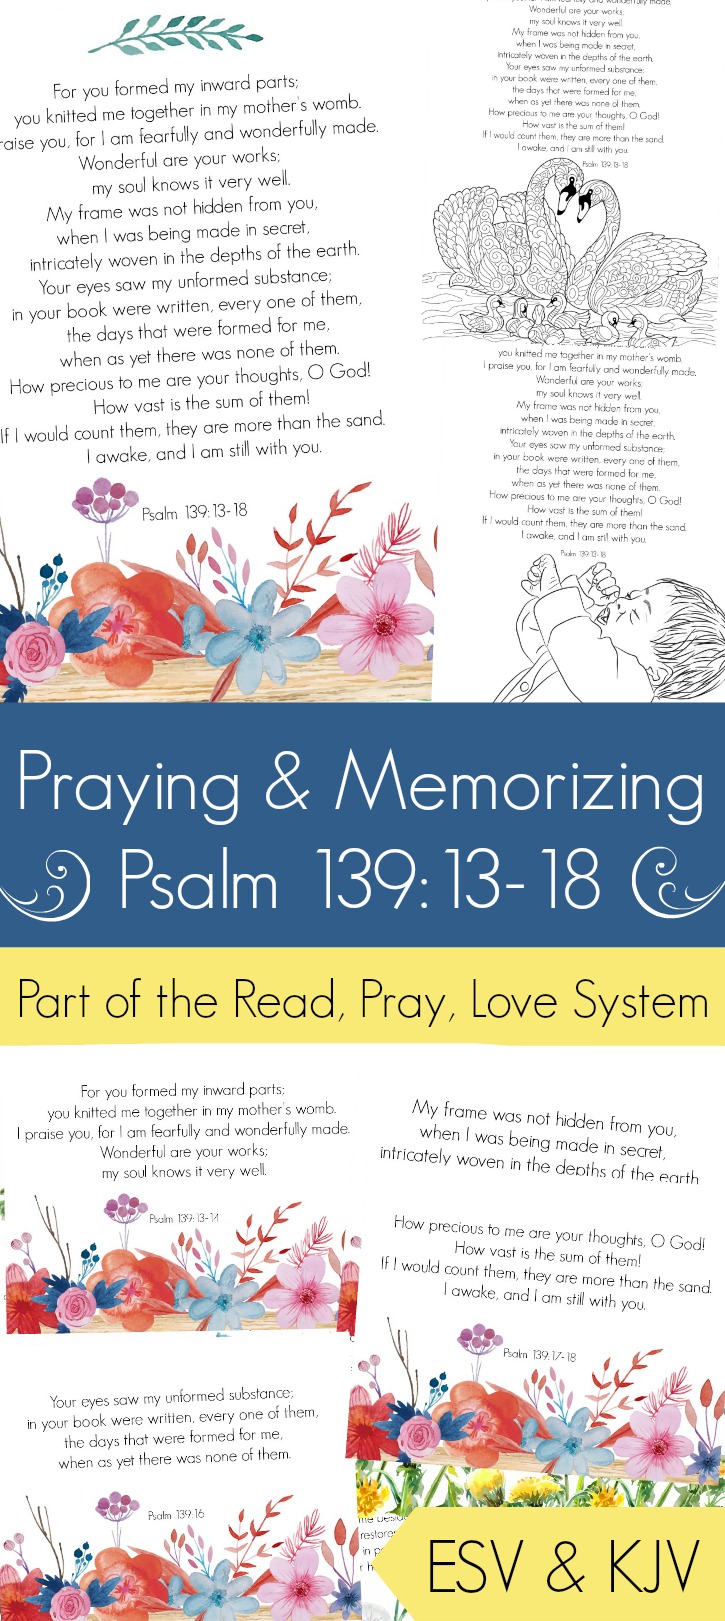 Pray and memorize psalm 139:13-18 (the fearfully and wonderfully made scriptures) with your family!åç